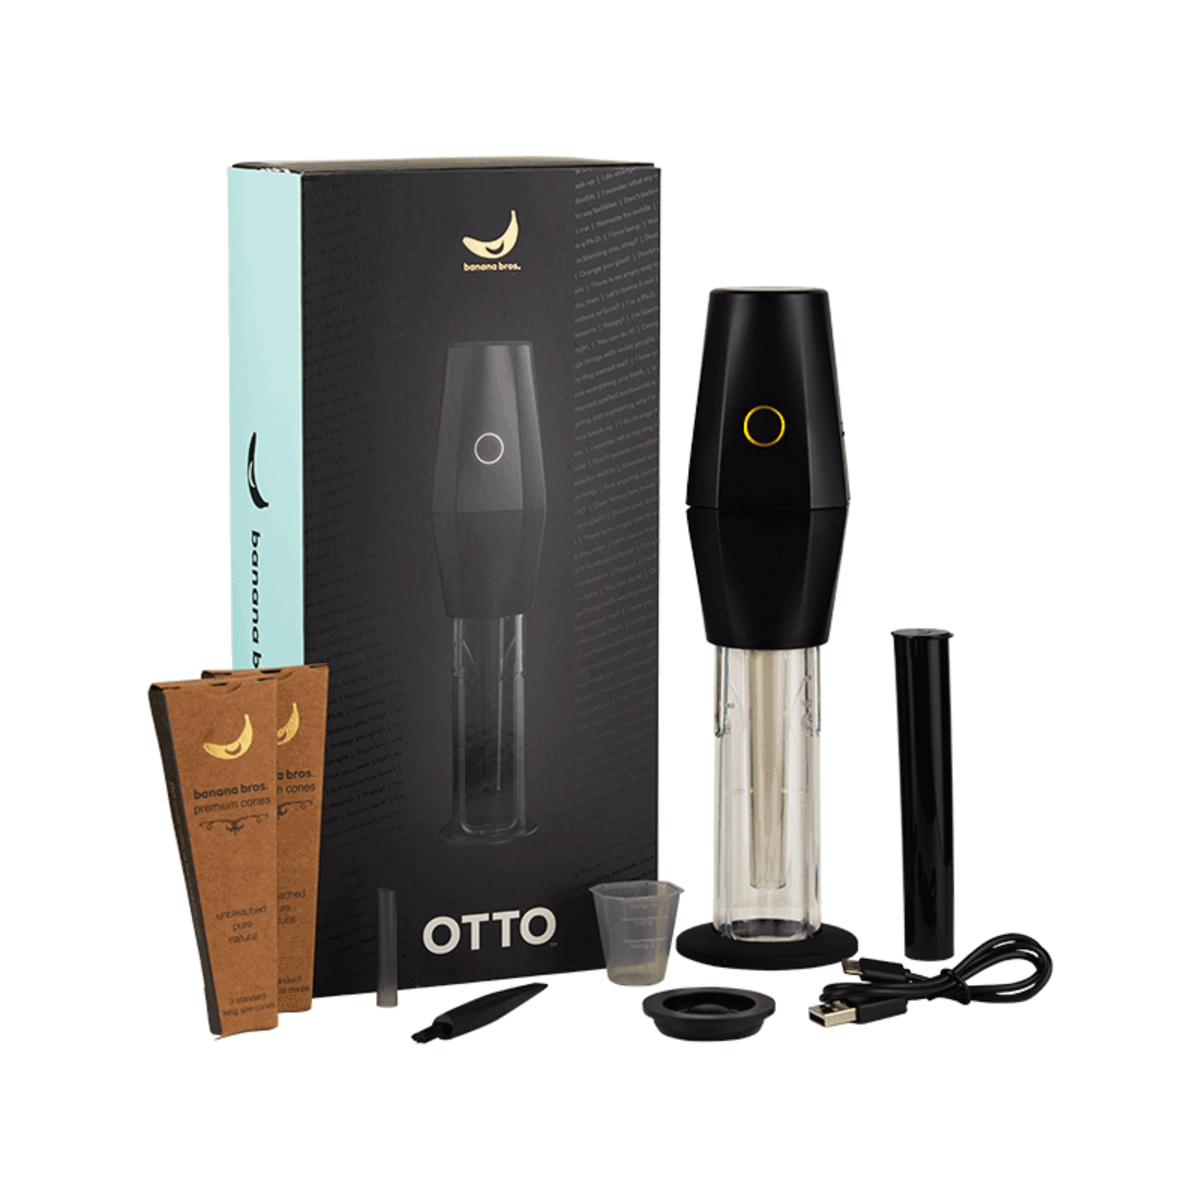 Grinder eléctrico Otto Kit Completo - Bloommart Colombia